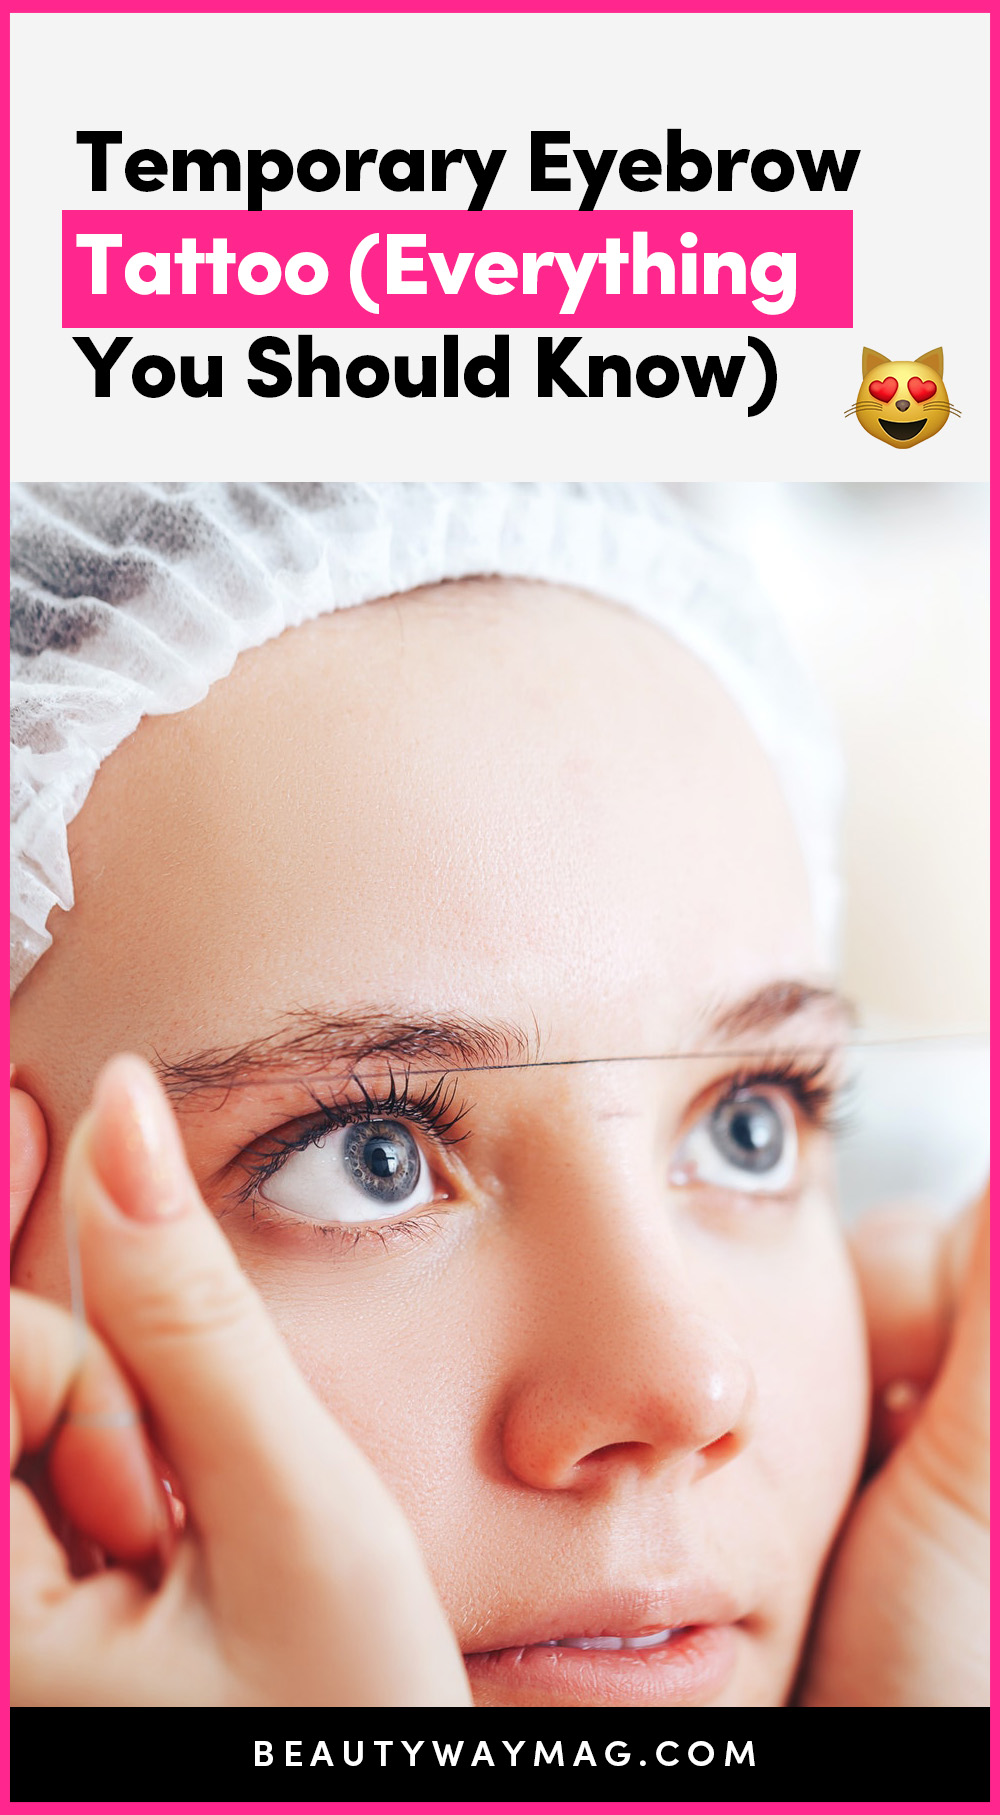 Temporary Eyebrow Tattoo (Everything You Should Know)